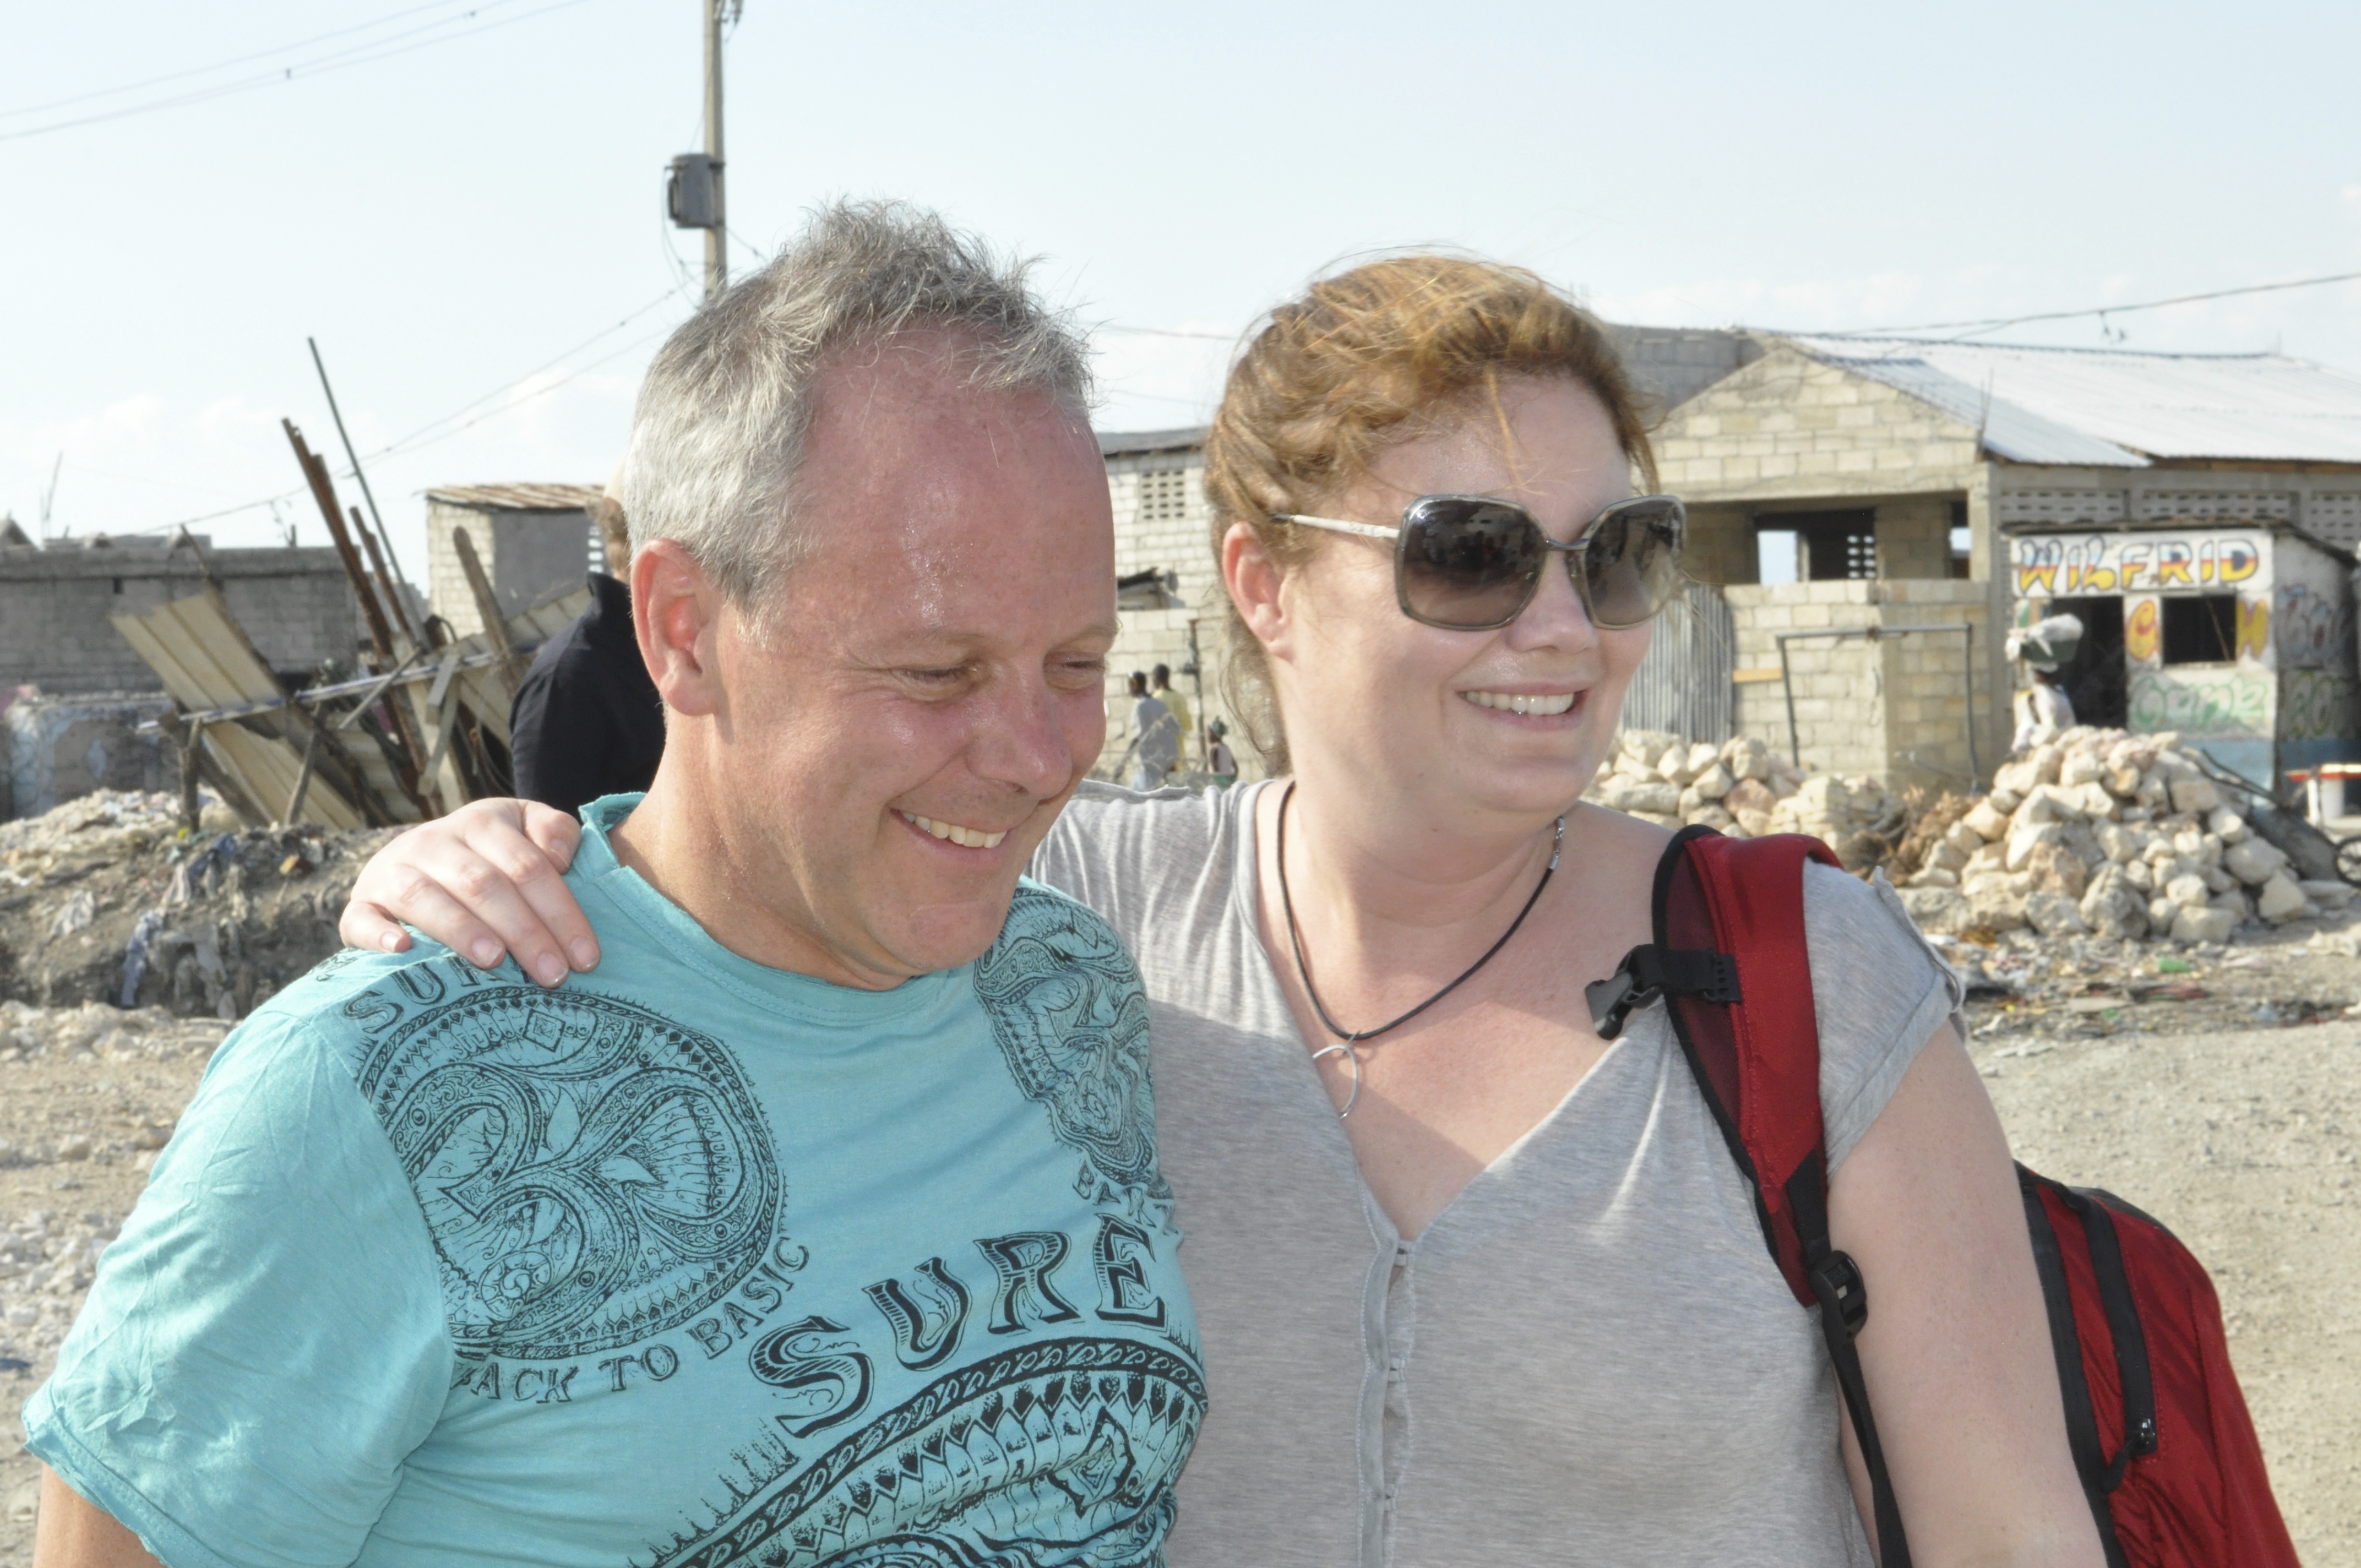 Gareth Seltzer (producer) with Martha Rogers (producer) in Haiti at the Maria Bello Women's Health Unit